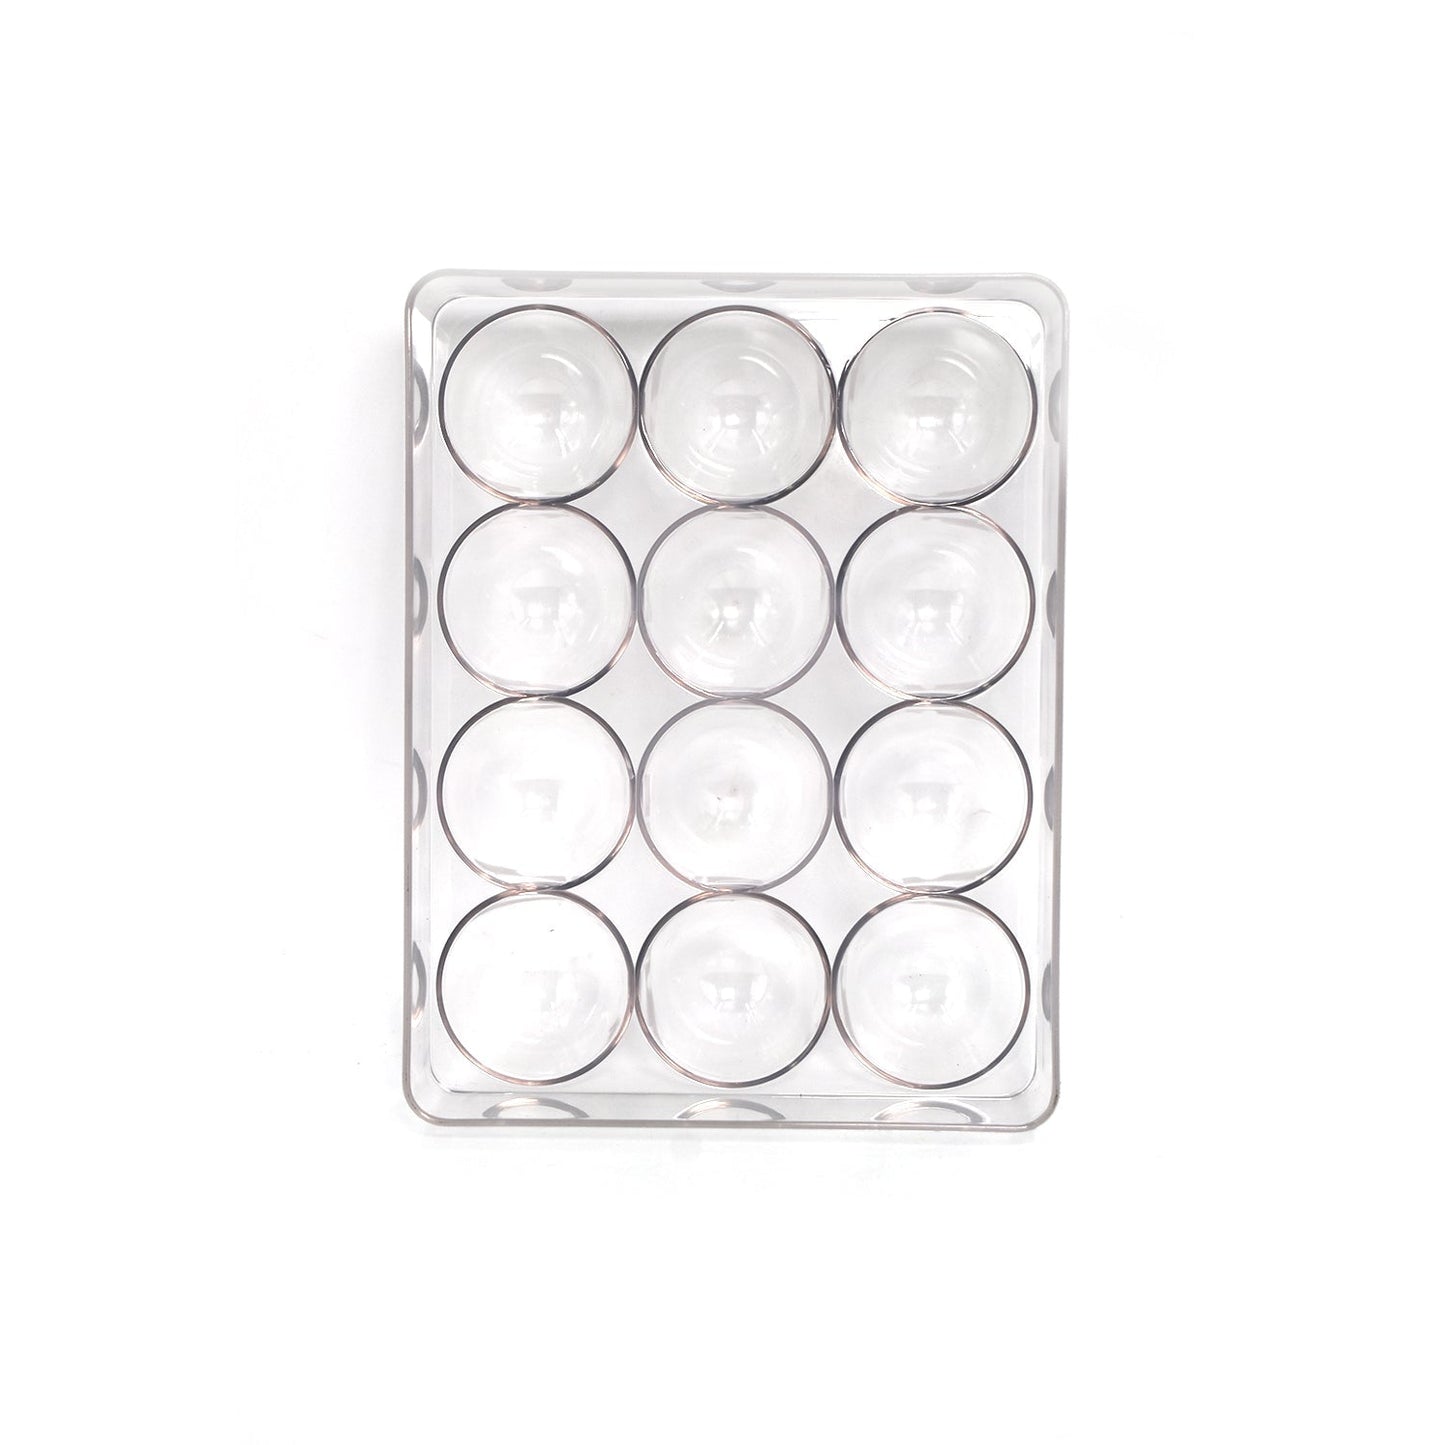 2794 12 Cavity Egg Storage Box For Holding And Placing Eggs Easily And Firmly.